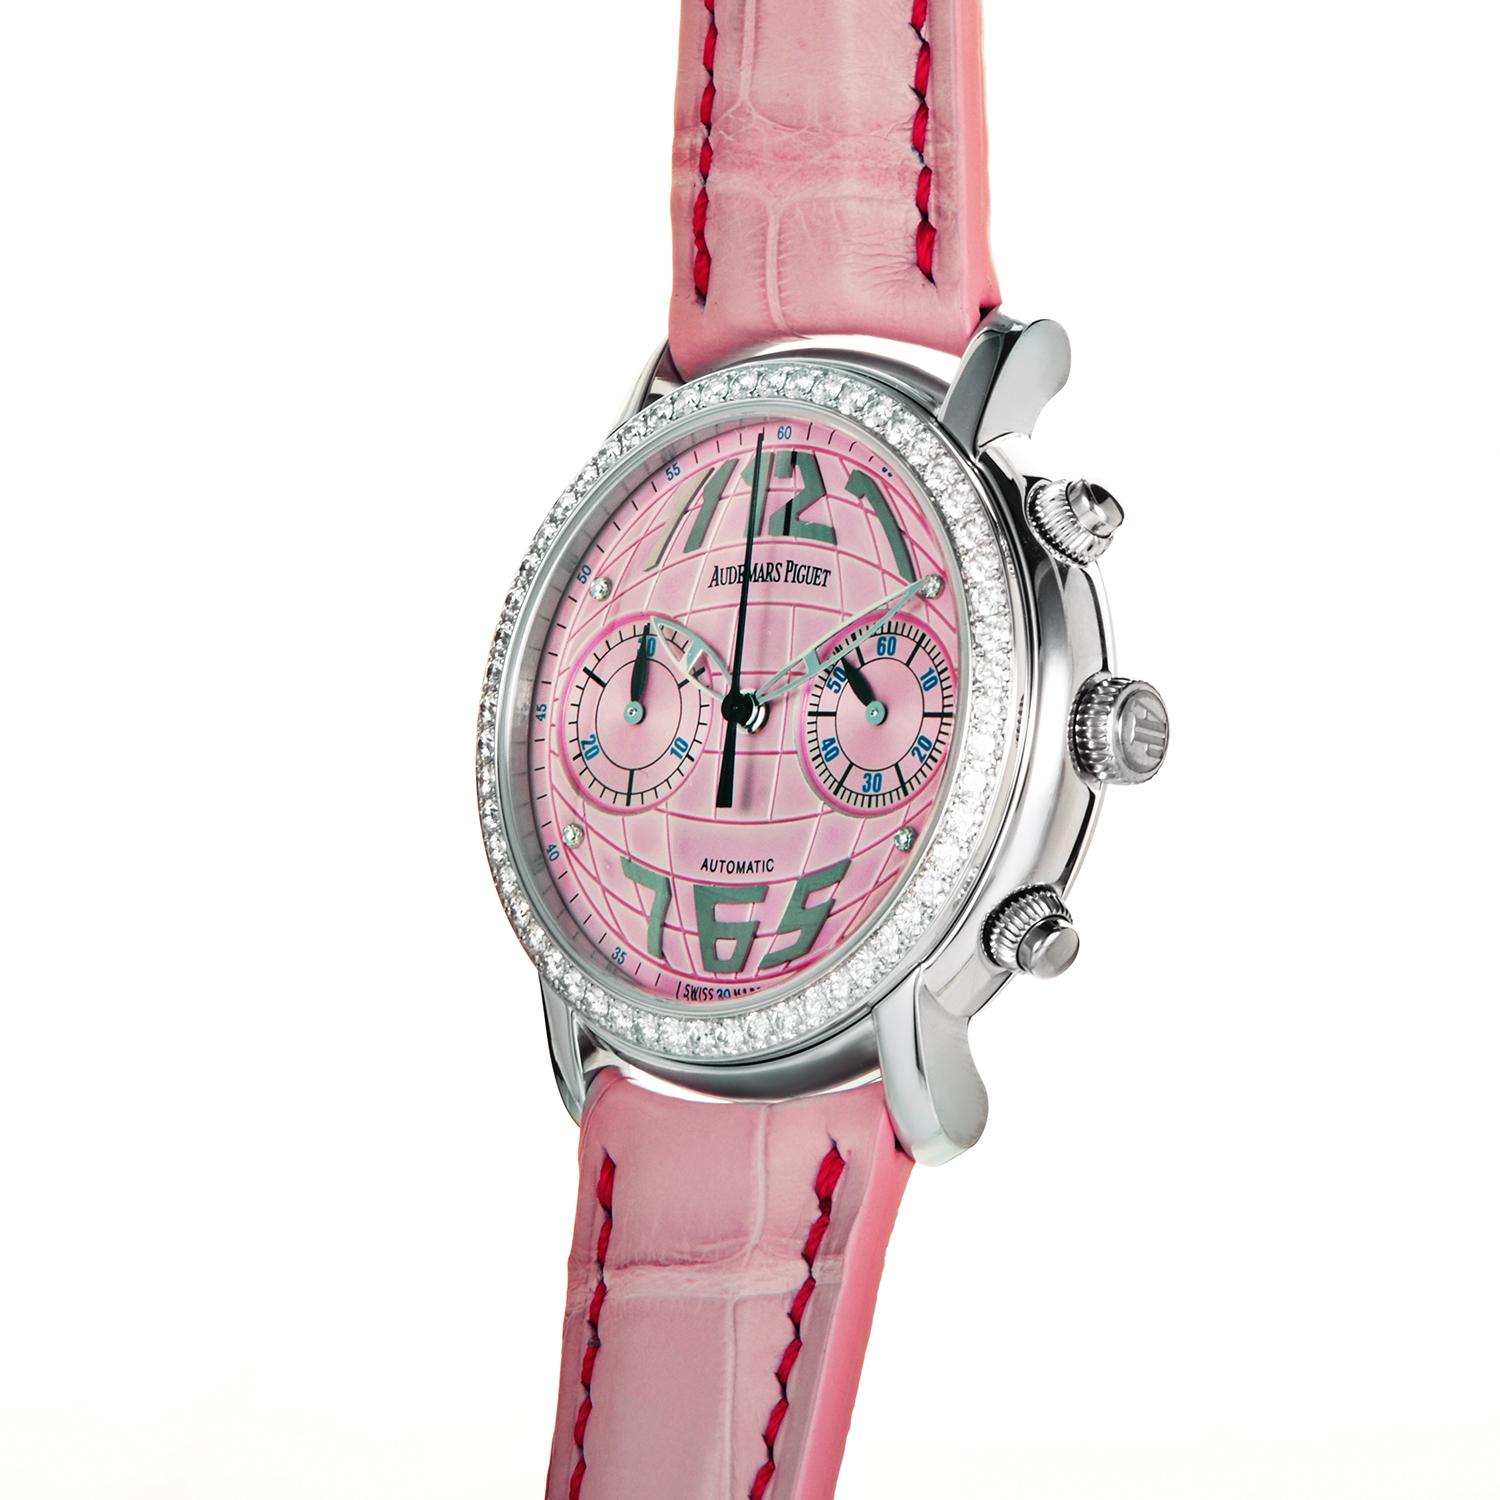 Pretty and pink, this Jules Audemars Ladies Chronograph is sure to please! The watch's round case is made of 18K white gold and boasts a bezel set with a row of 57 diamonds. The watch's dial looks like a pink globe and displays chronograph sub-dials